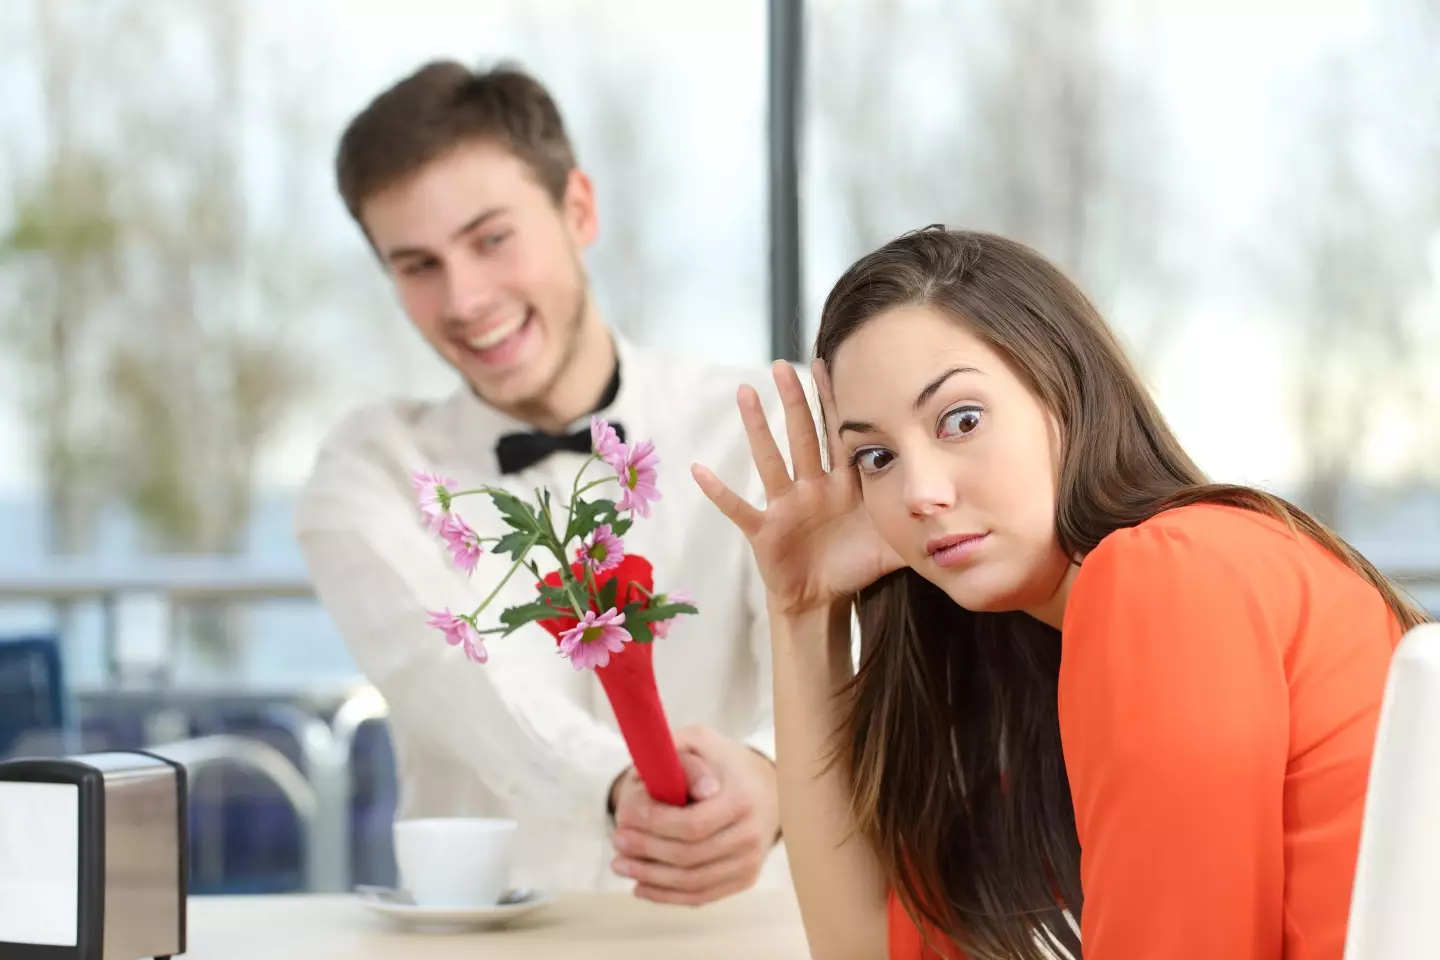 Women have spotted red flags (